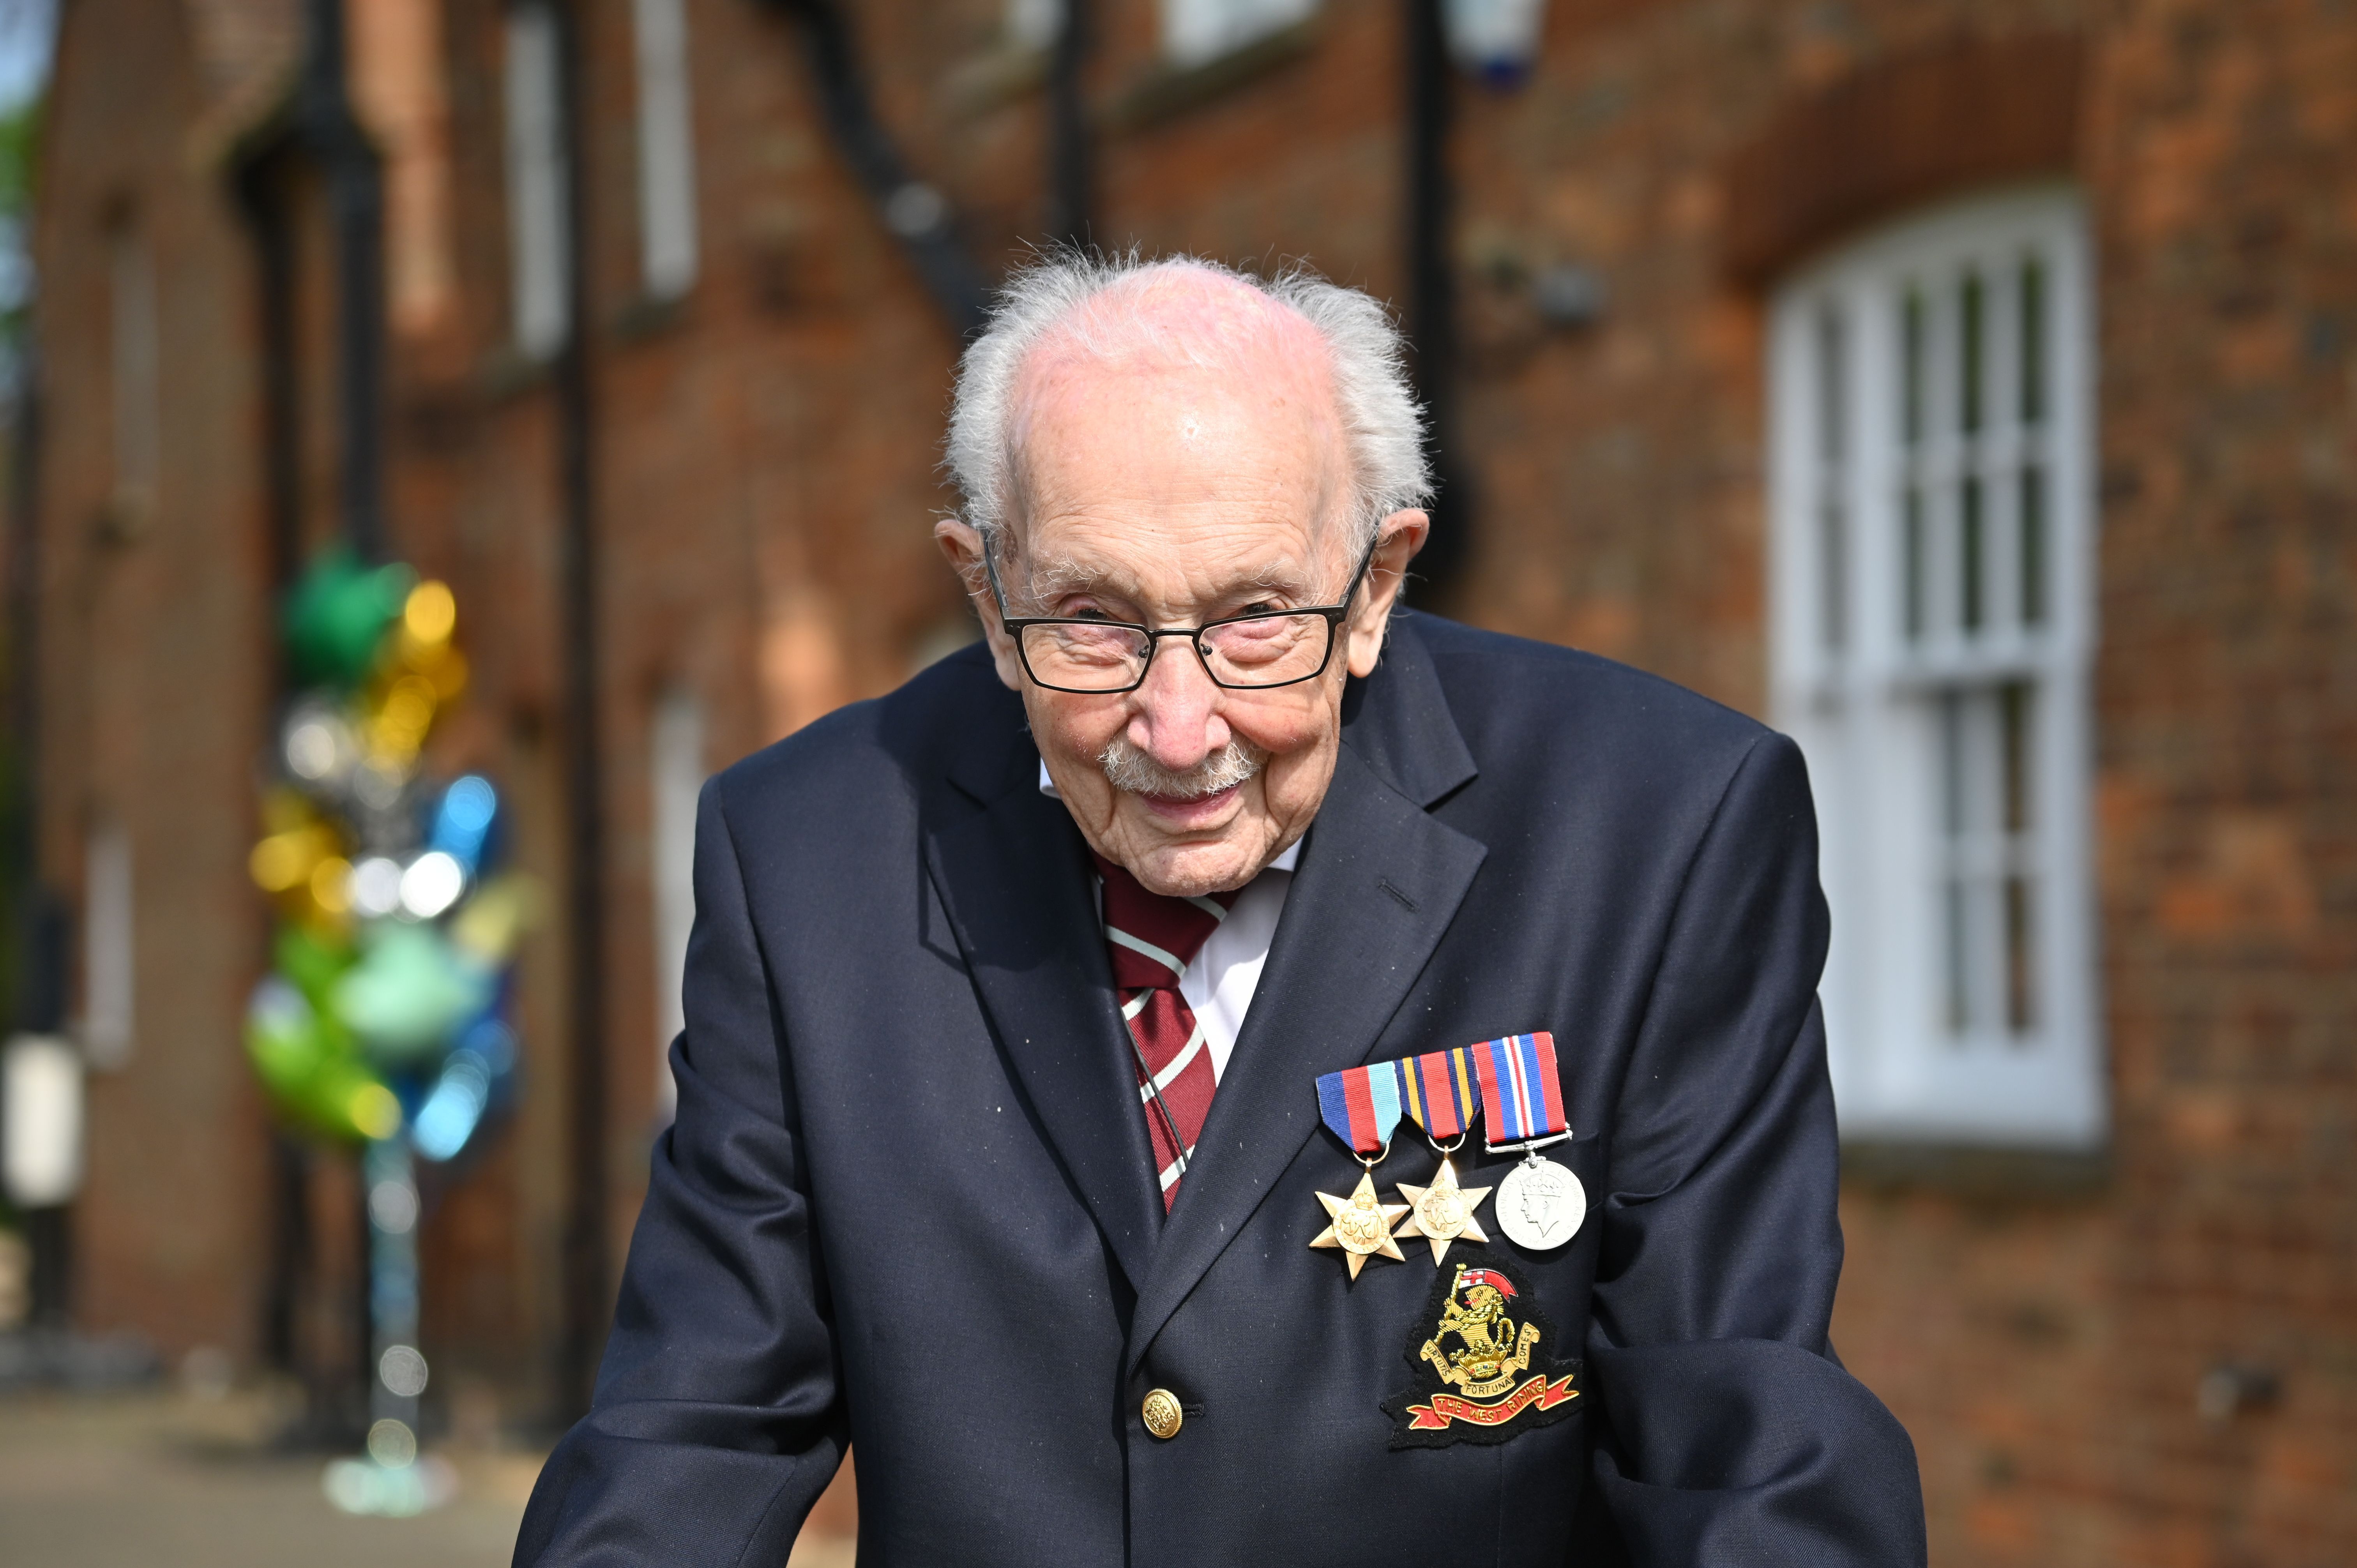 Captain Tom Moore, Who Raised Millions for the NHS, Dies at the Age of 100 After Contracting COVID-19